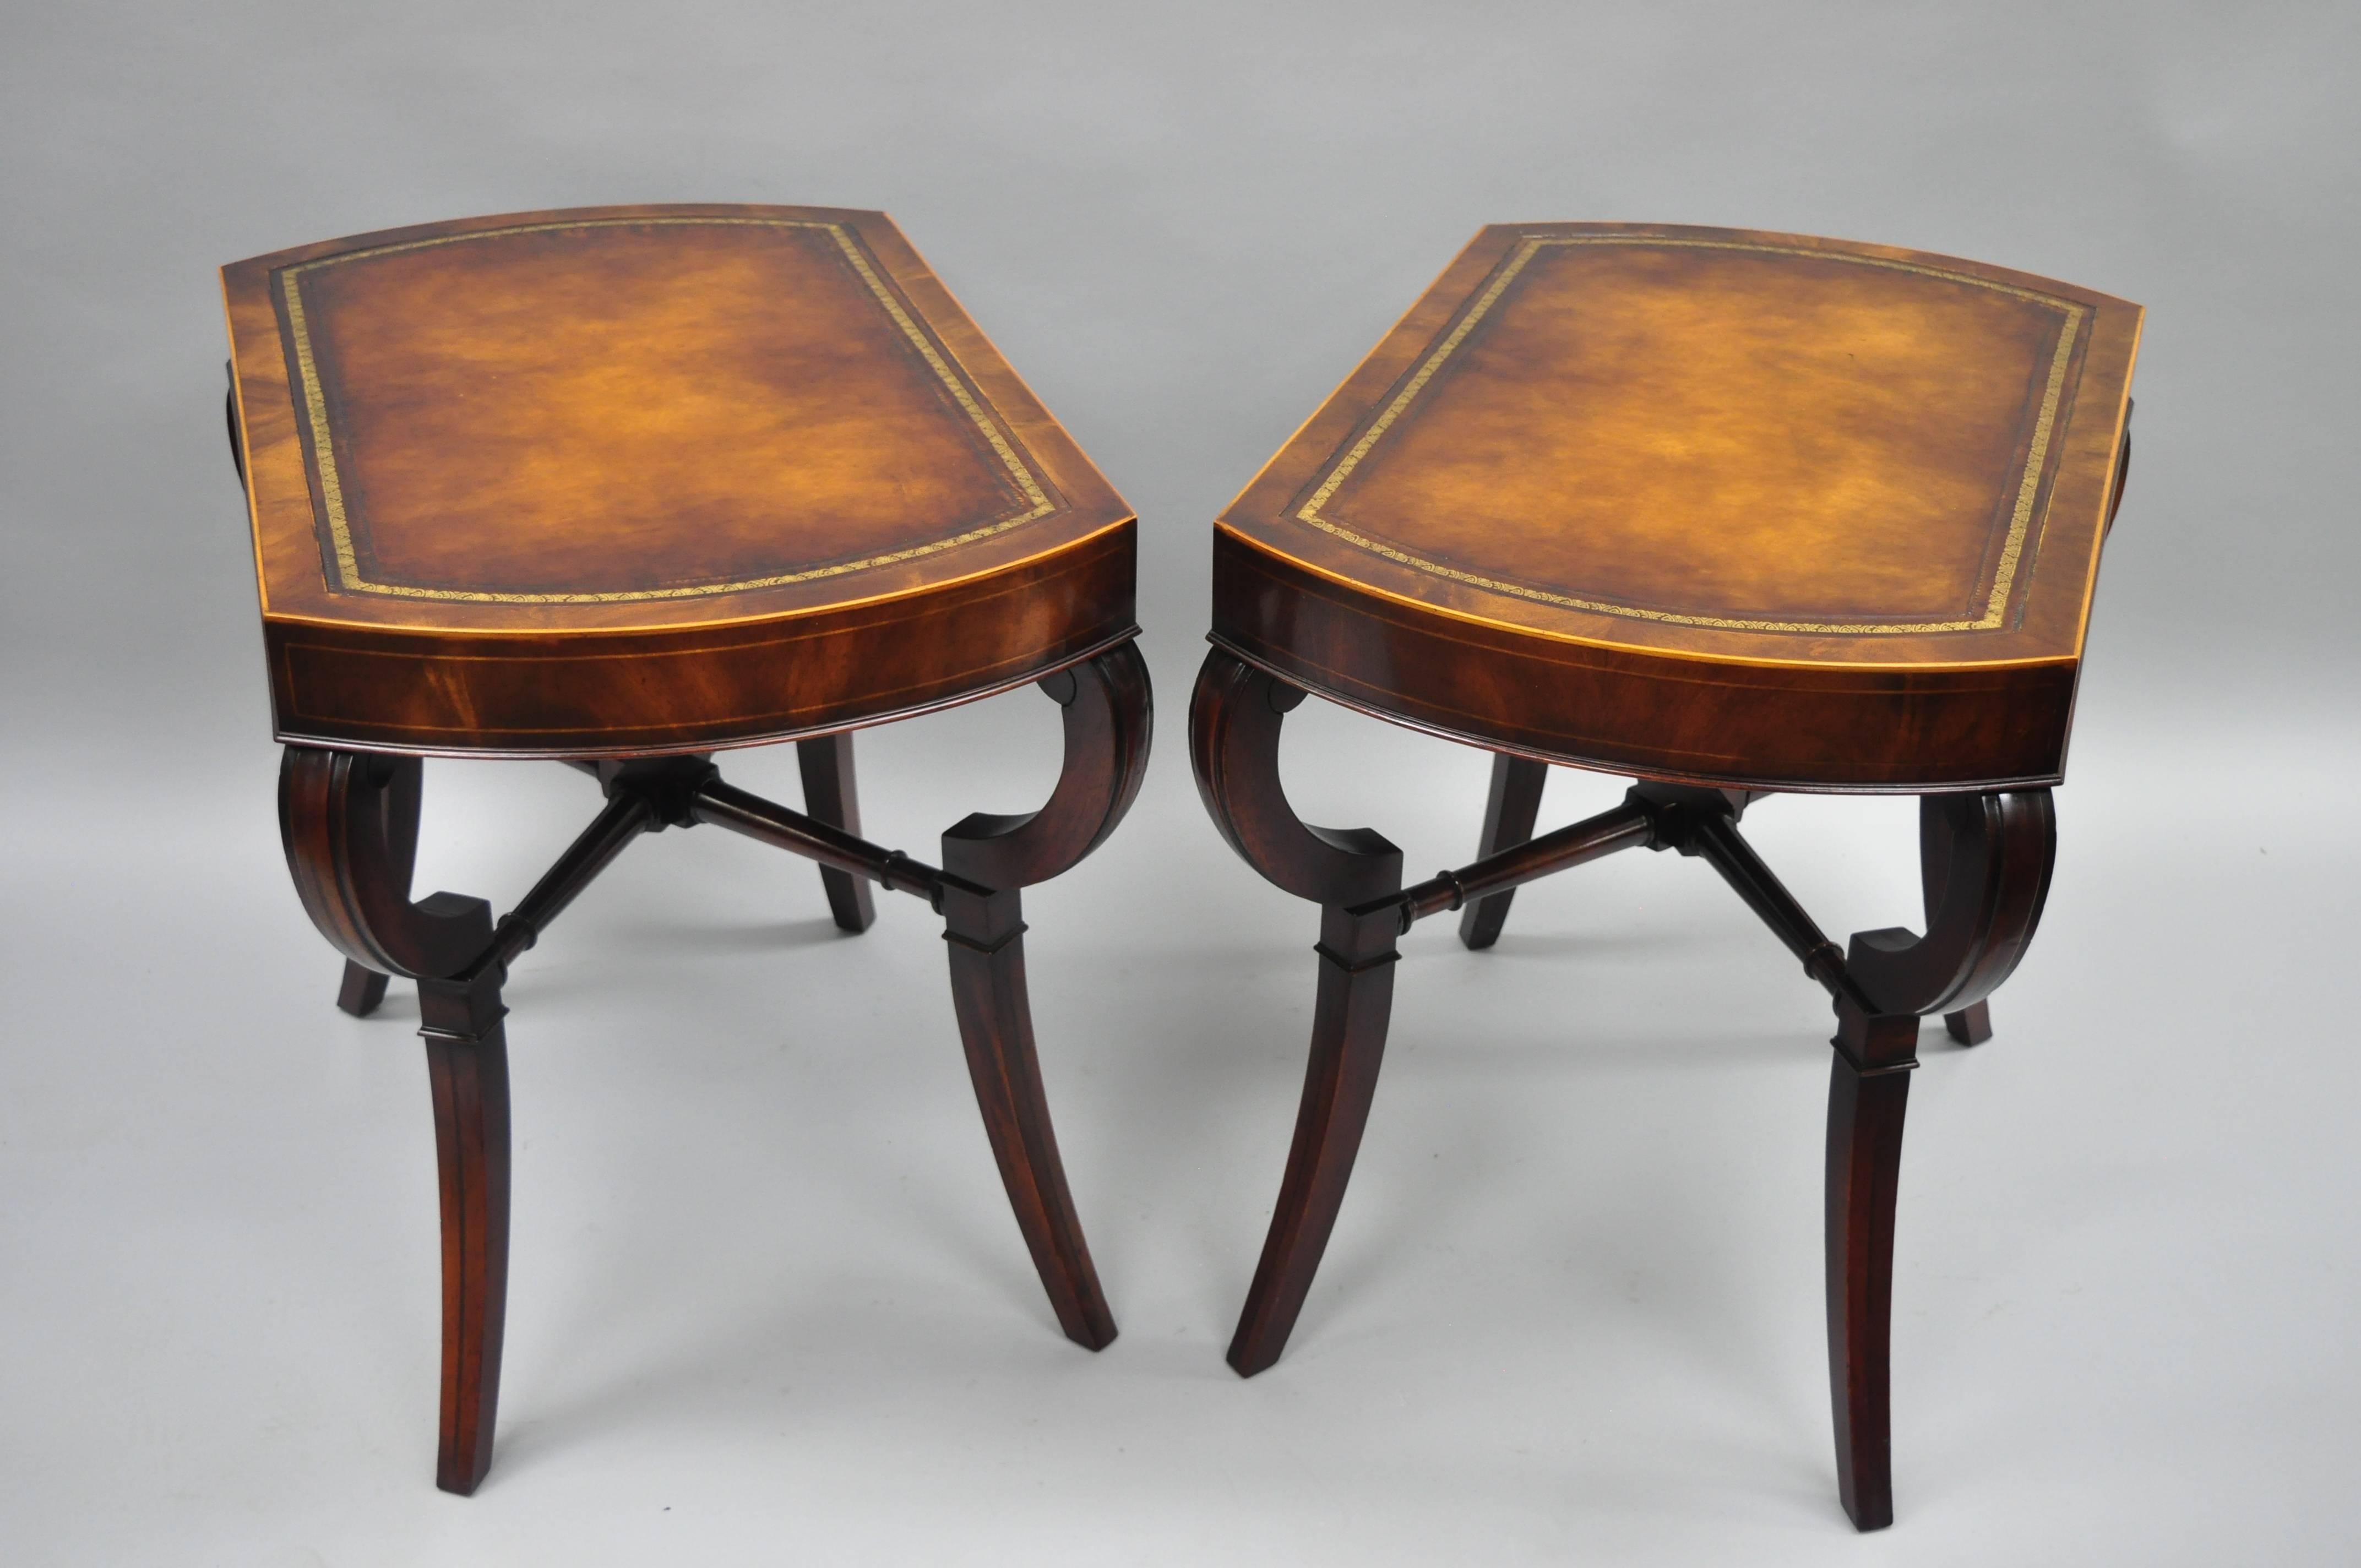 Pair of Flame Mahogany Leather Top English Regency Style Saber Leg End Tables 7